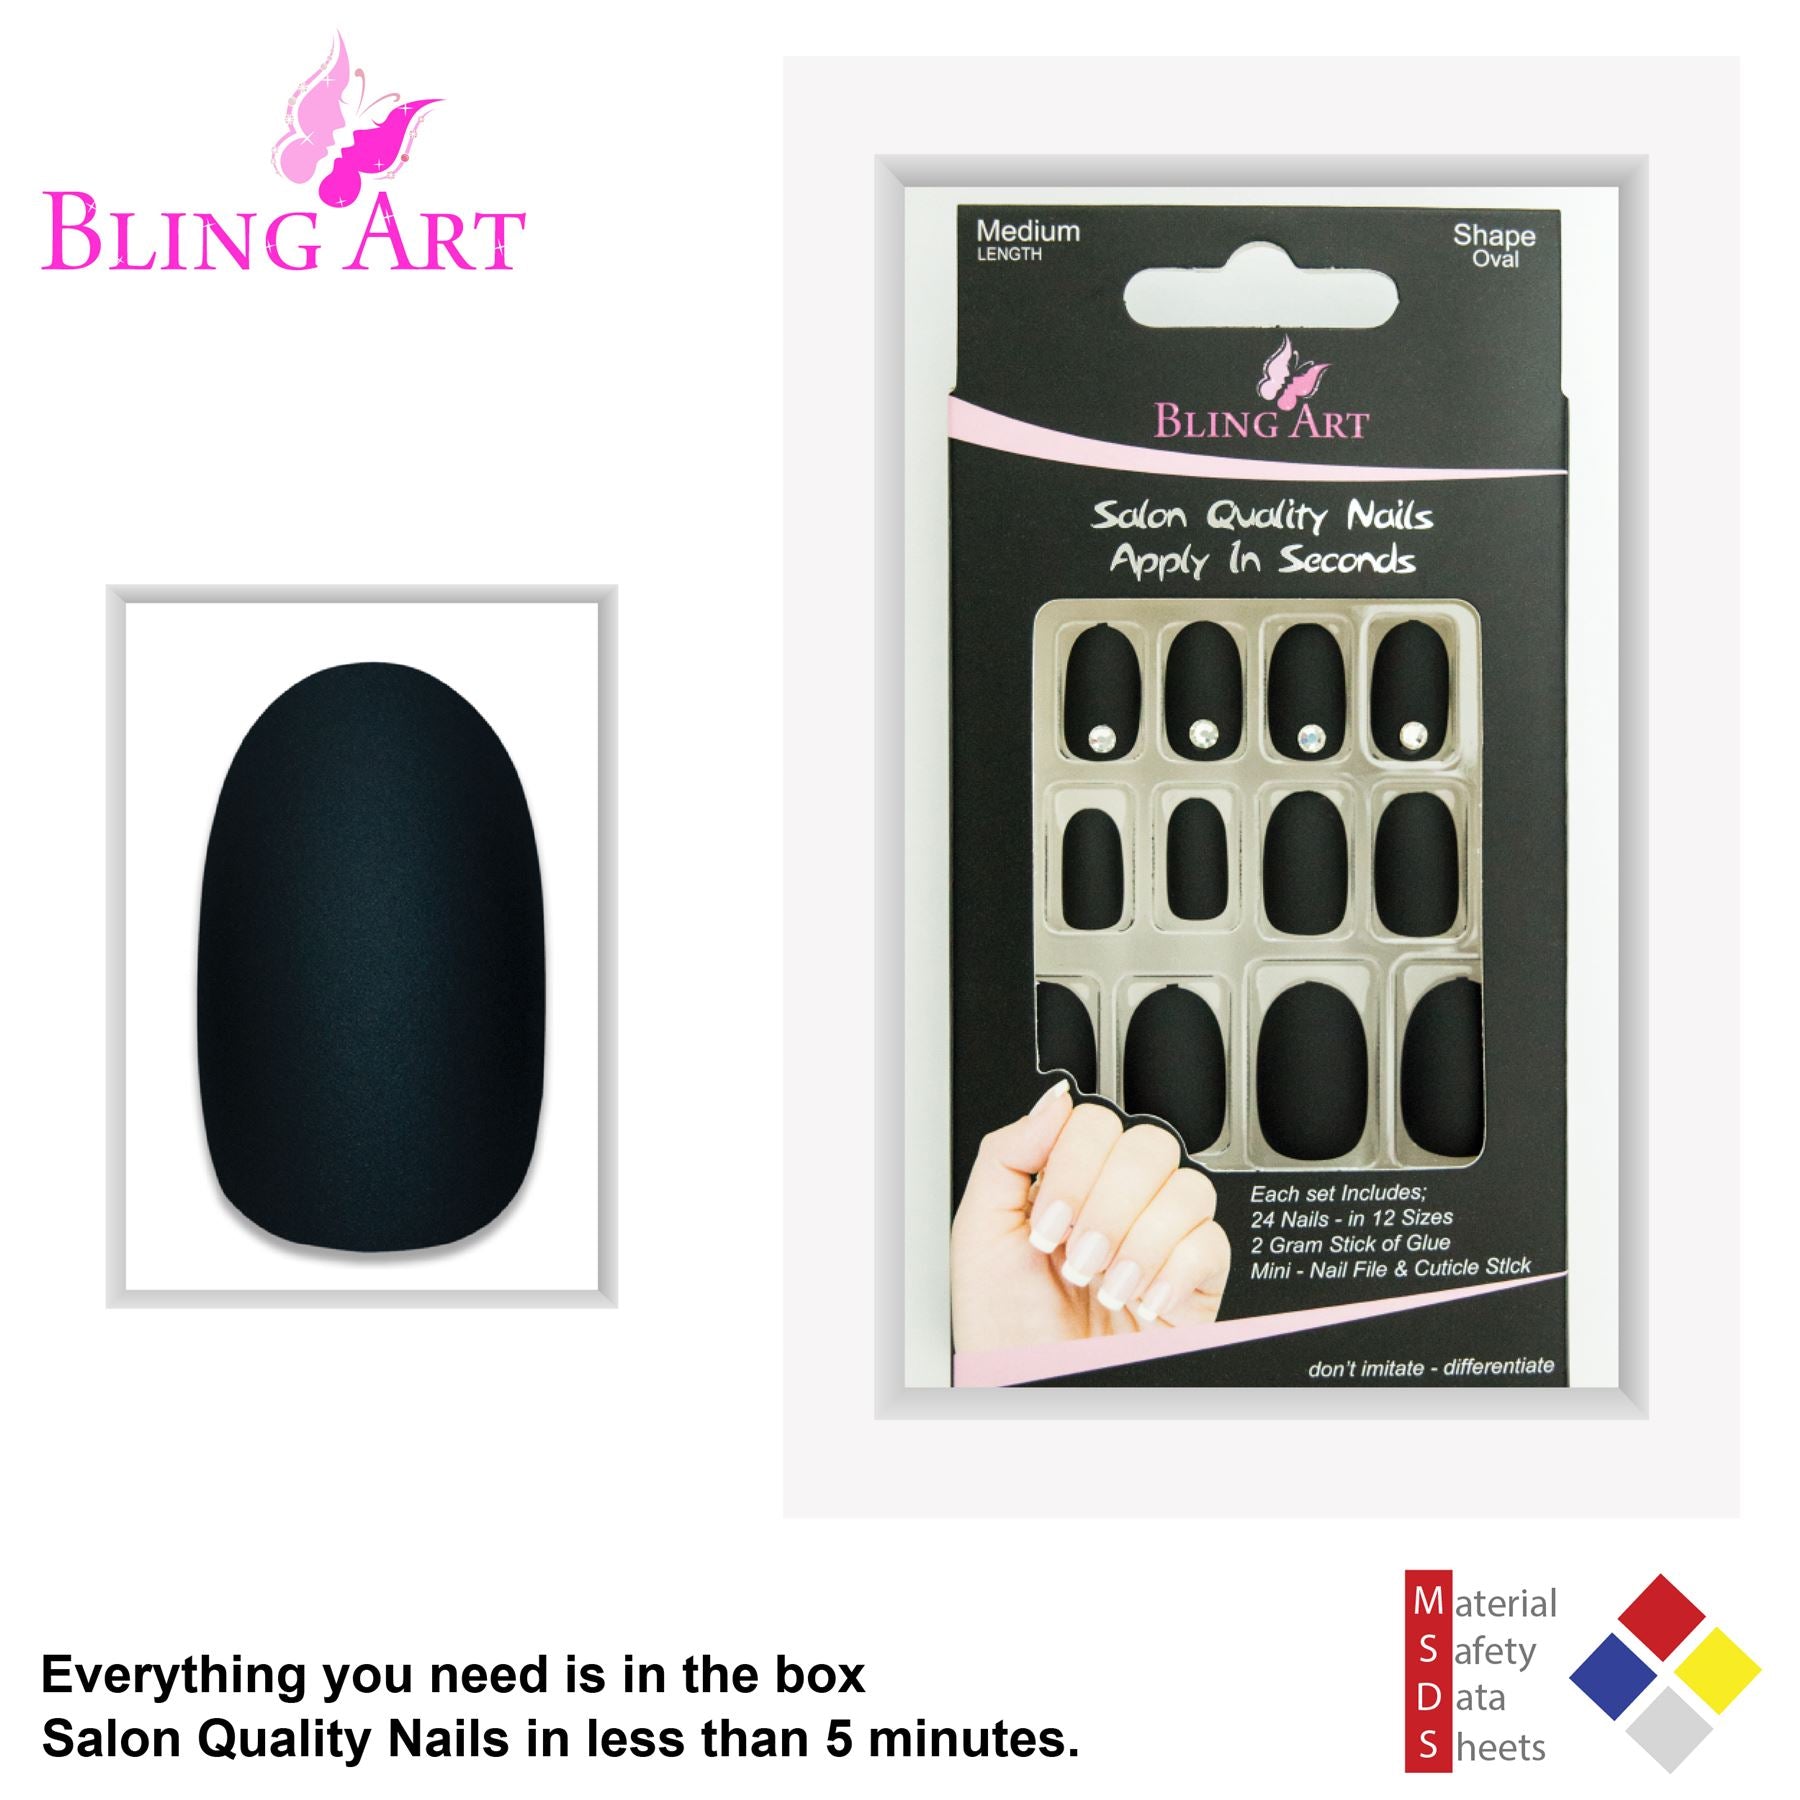 False Nails by Bling Art Black Matte Oval Medium Fake Acrylic 24 Tips with Glue